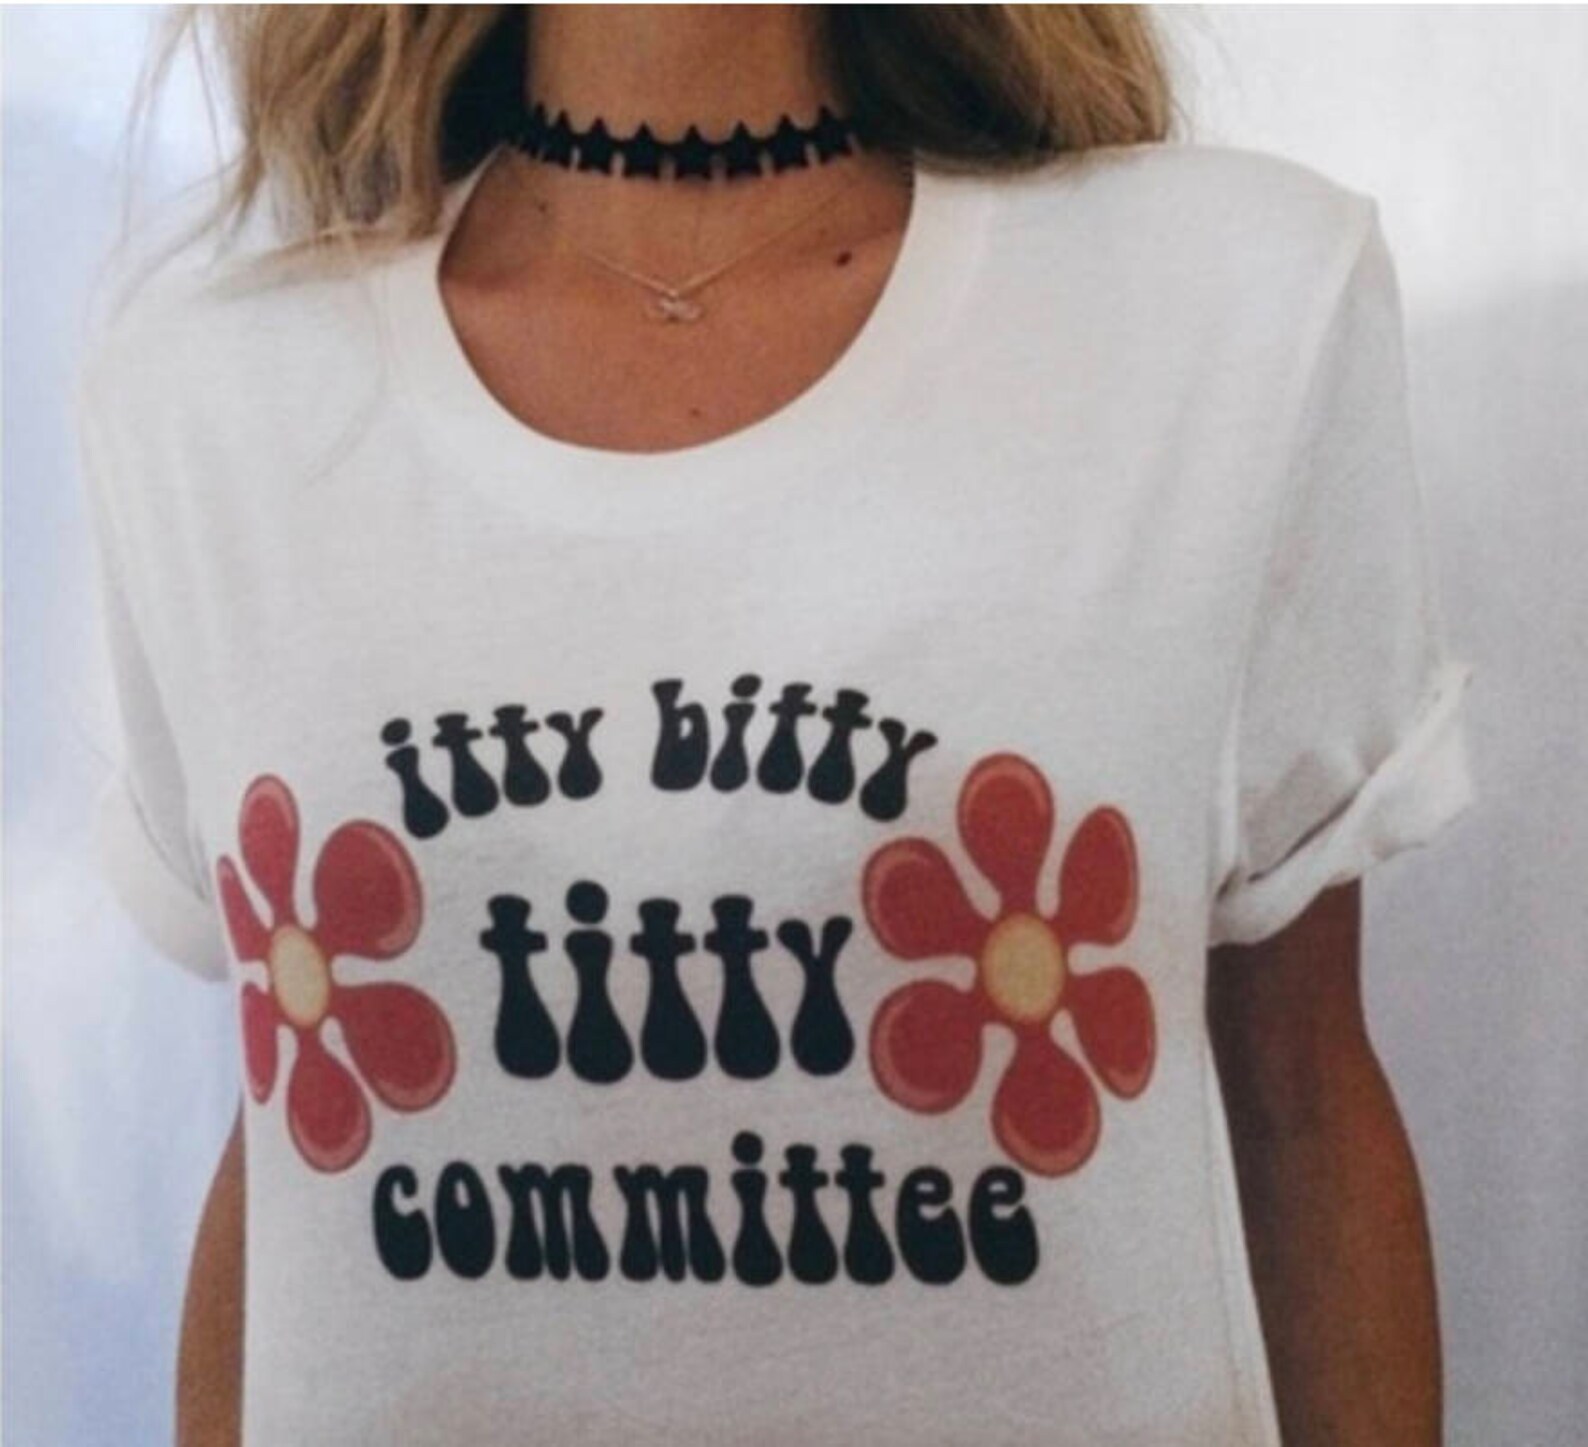 Itty Bitty Titty Committee Shirt, 70s Clothing, 70s Tshirt, Hippie Clothes,...